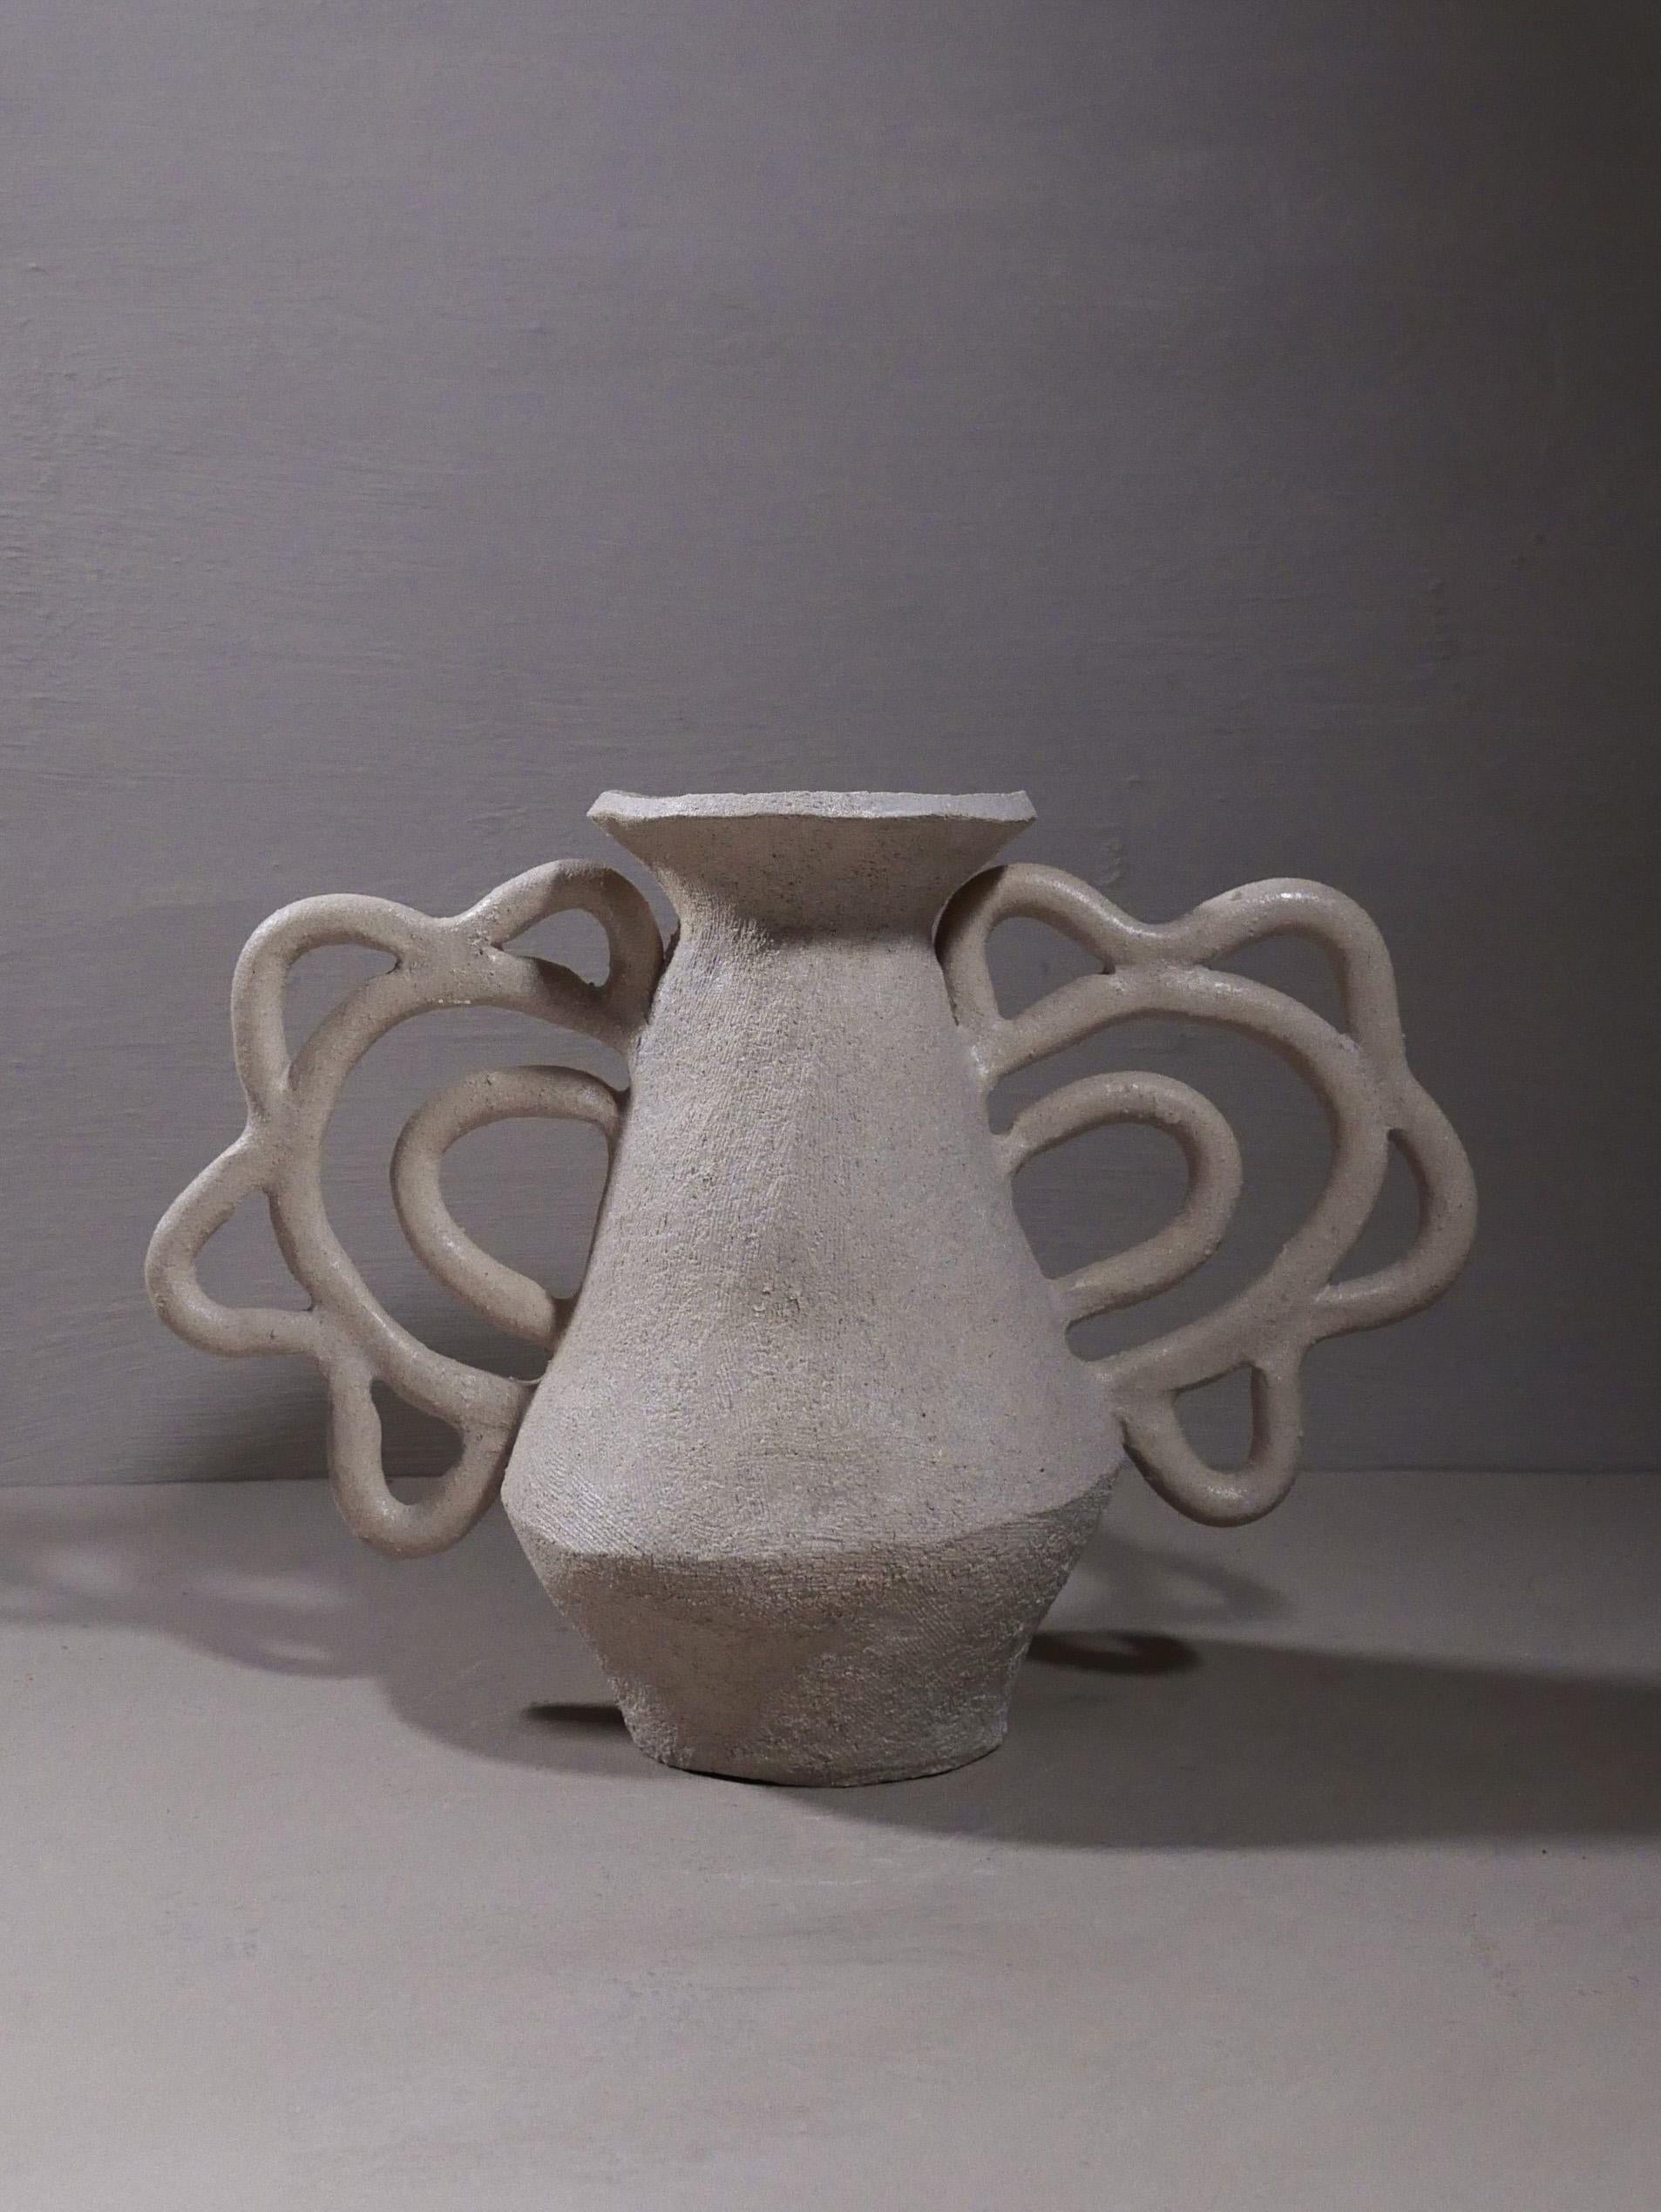 One-of-a-kind vase with two very intricate lace-like handles, hand-built by artist Sophie Agullo in Spain.

Supple, warm white matte finish on the exterior, with a glaze on the interior making it water-safe.